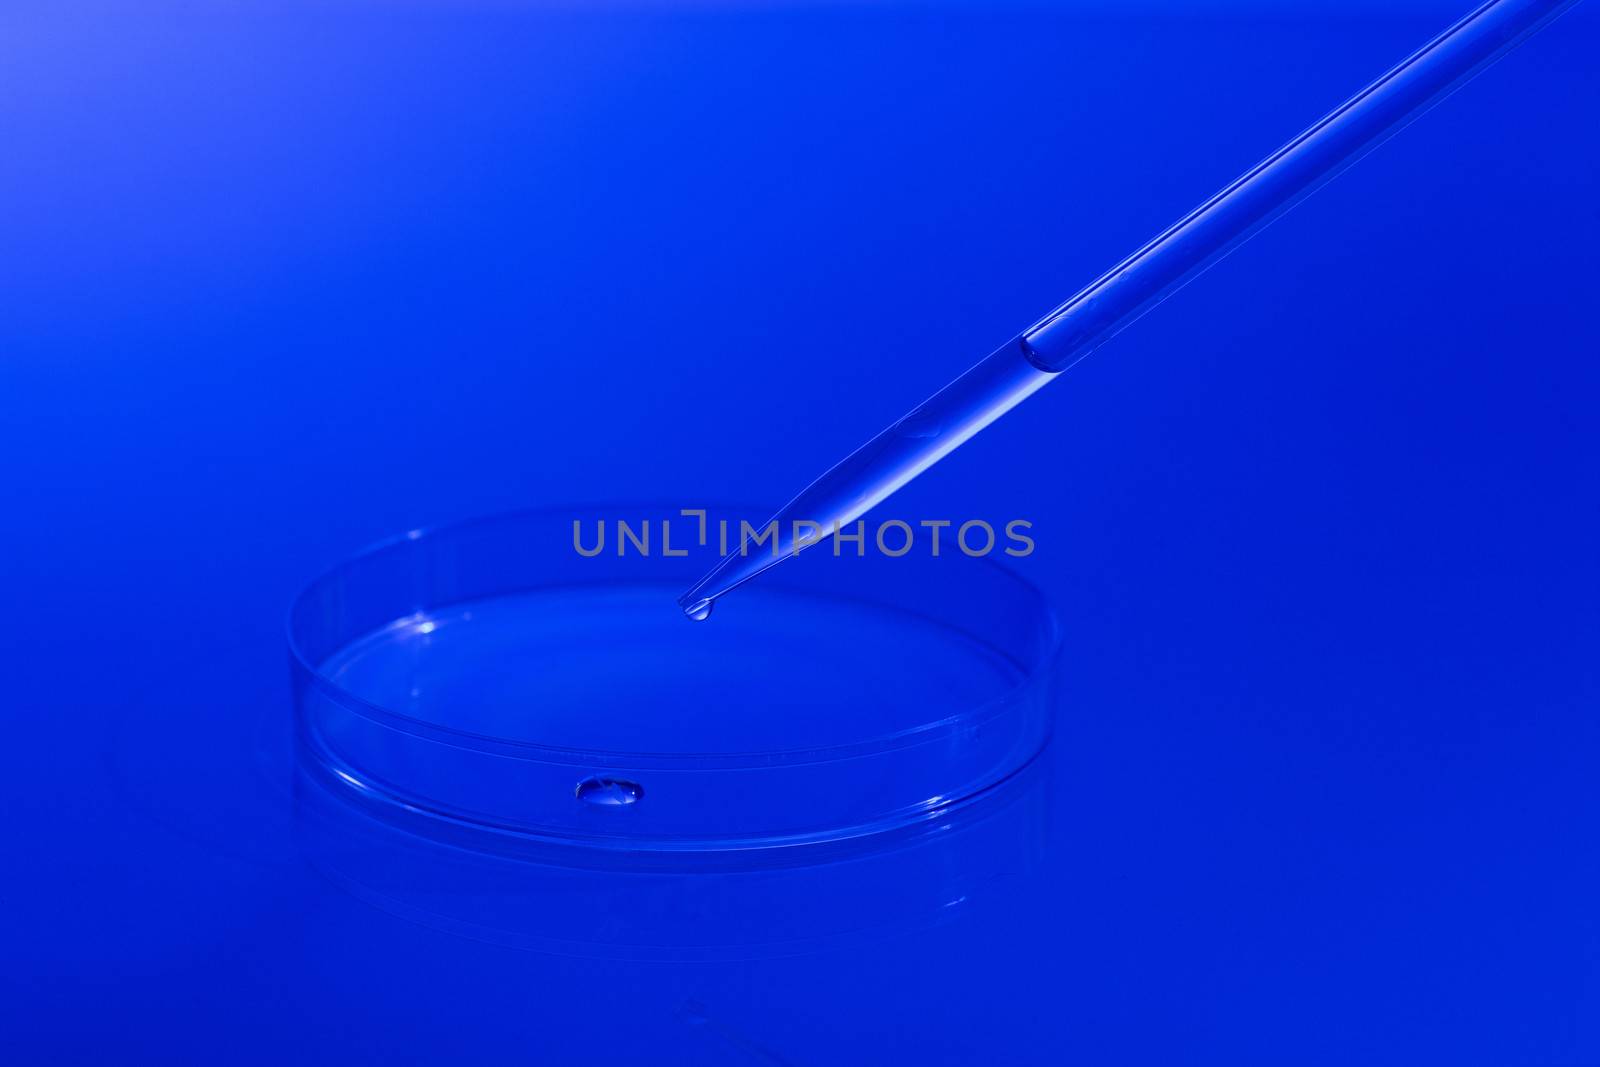 Image of droplet and glass plate. Microbiological laboratory